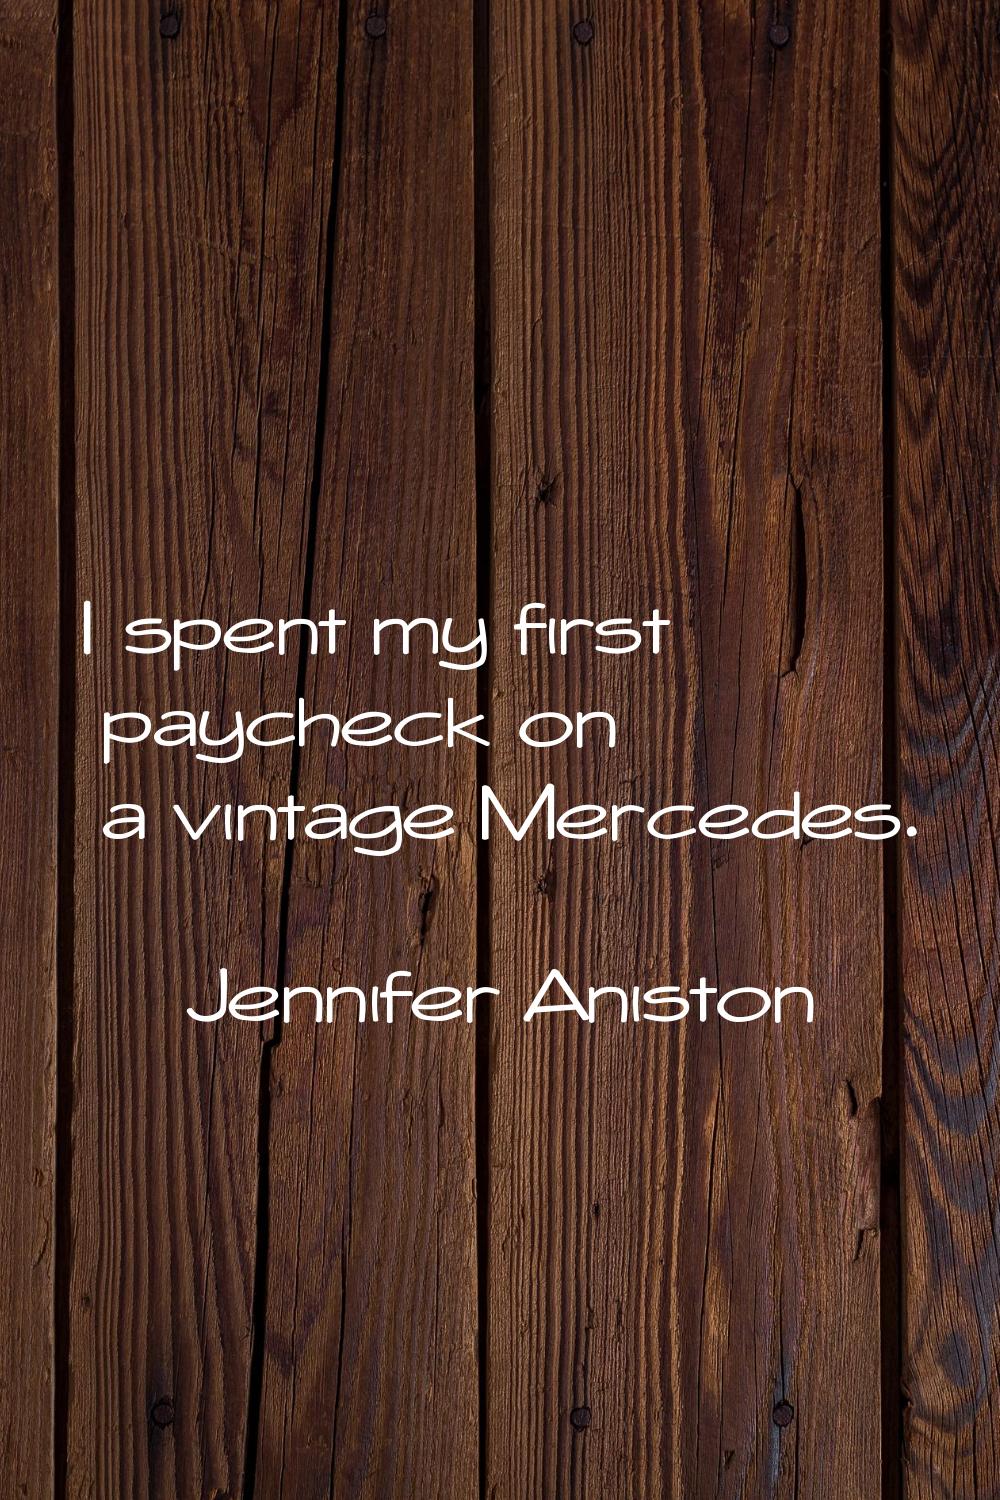 I spent my first paycheck on a vintage Mercedes.